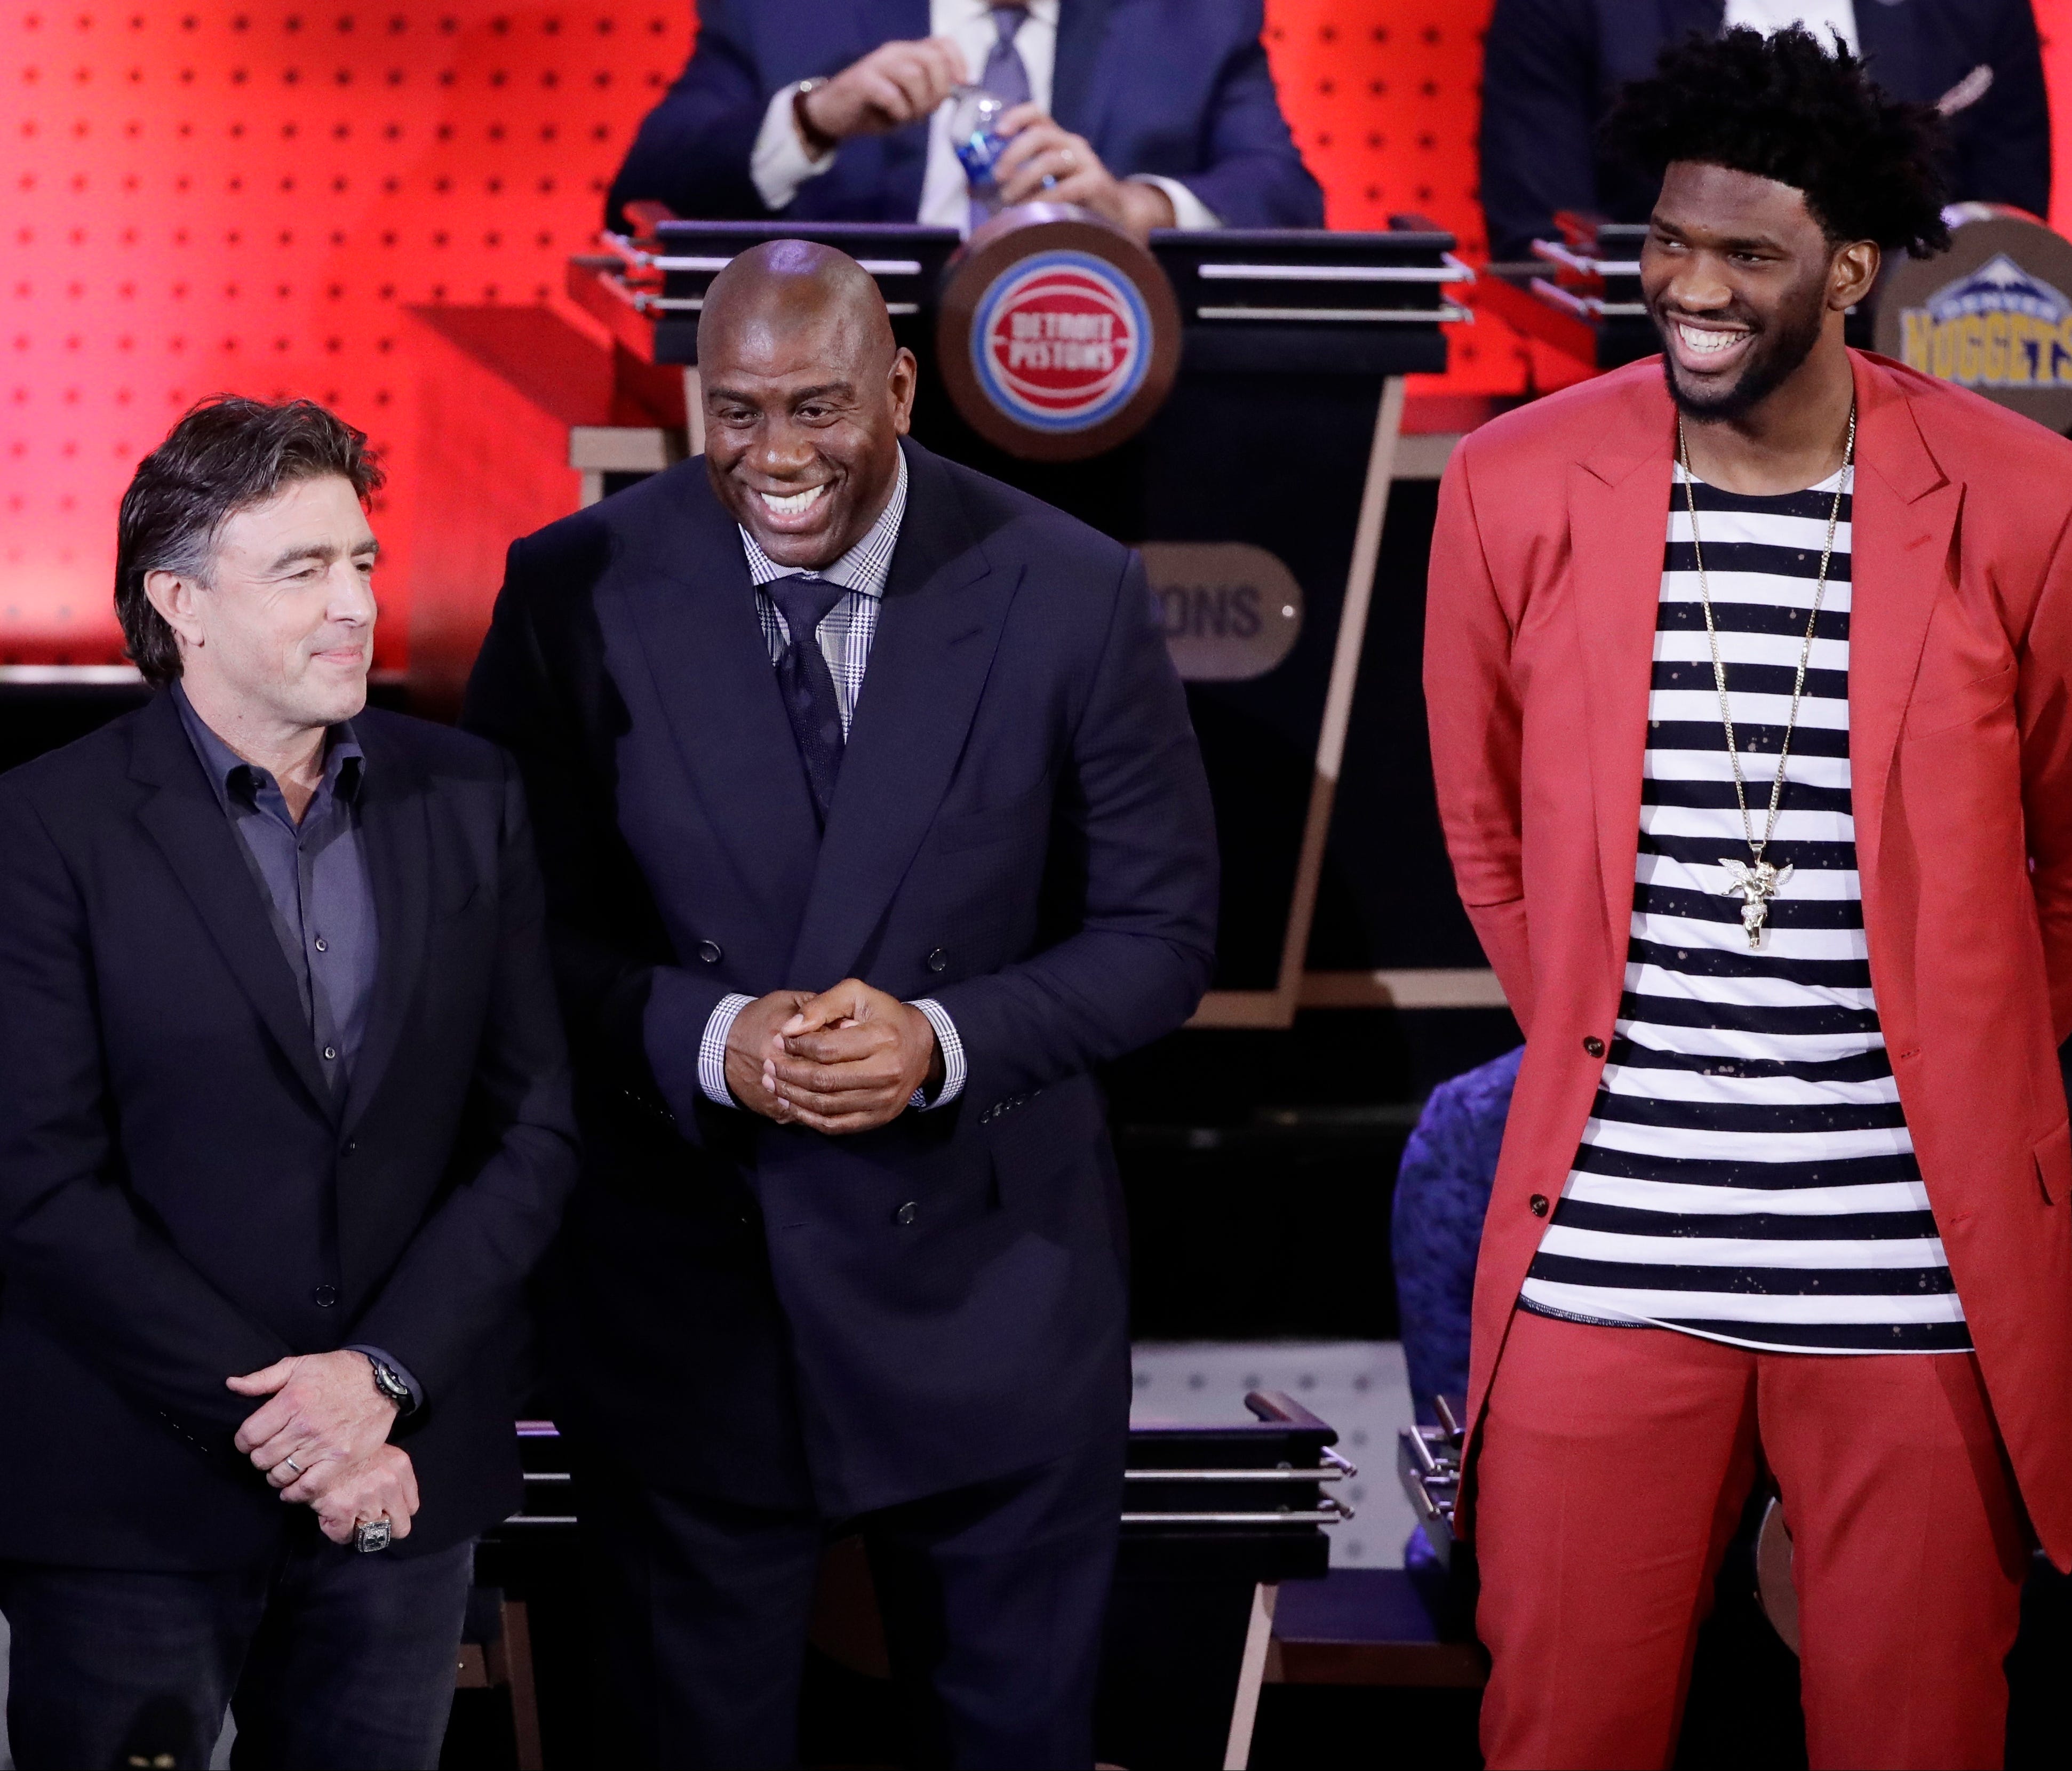 Boston Celtics co-owner Wyc Grousbeck, left, Magic Johnson, president of basketball operations for the Los Angeles Lakers, center, and Philadelphia 76ers' Joel Embiid, right, react after the learning they will get one of the first three picks at the 